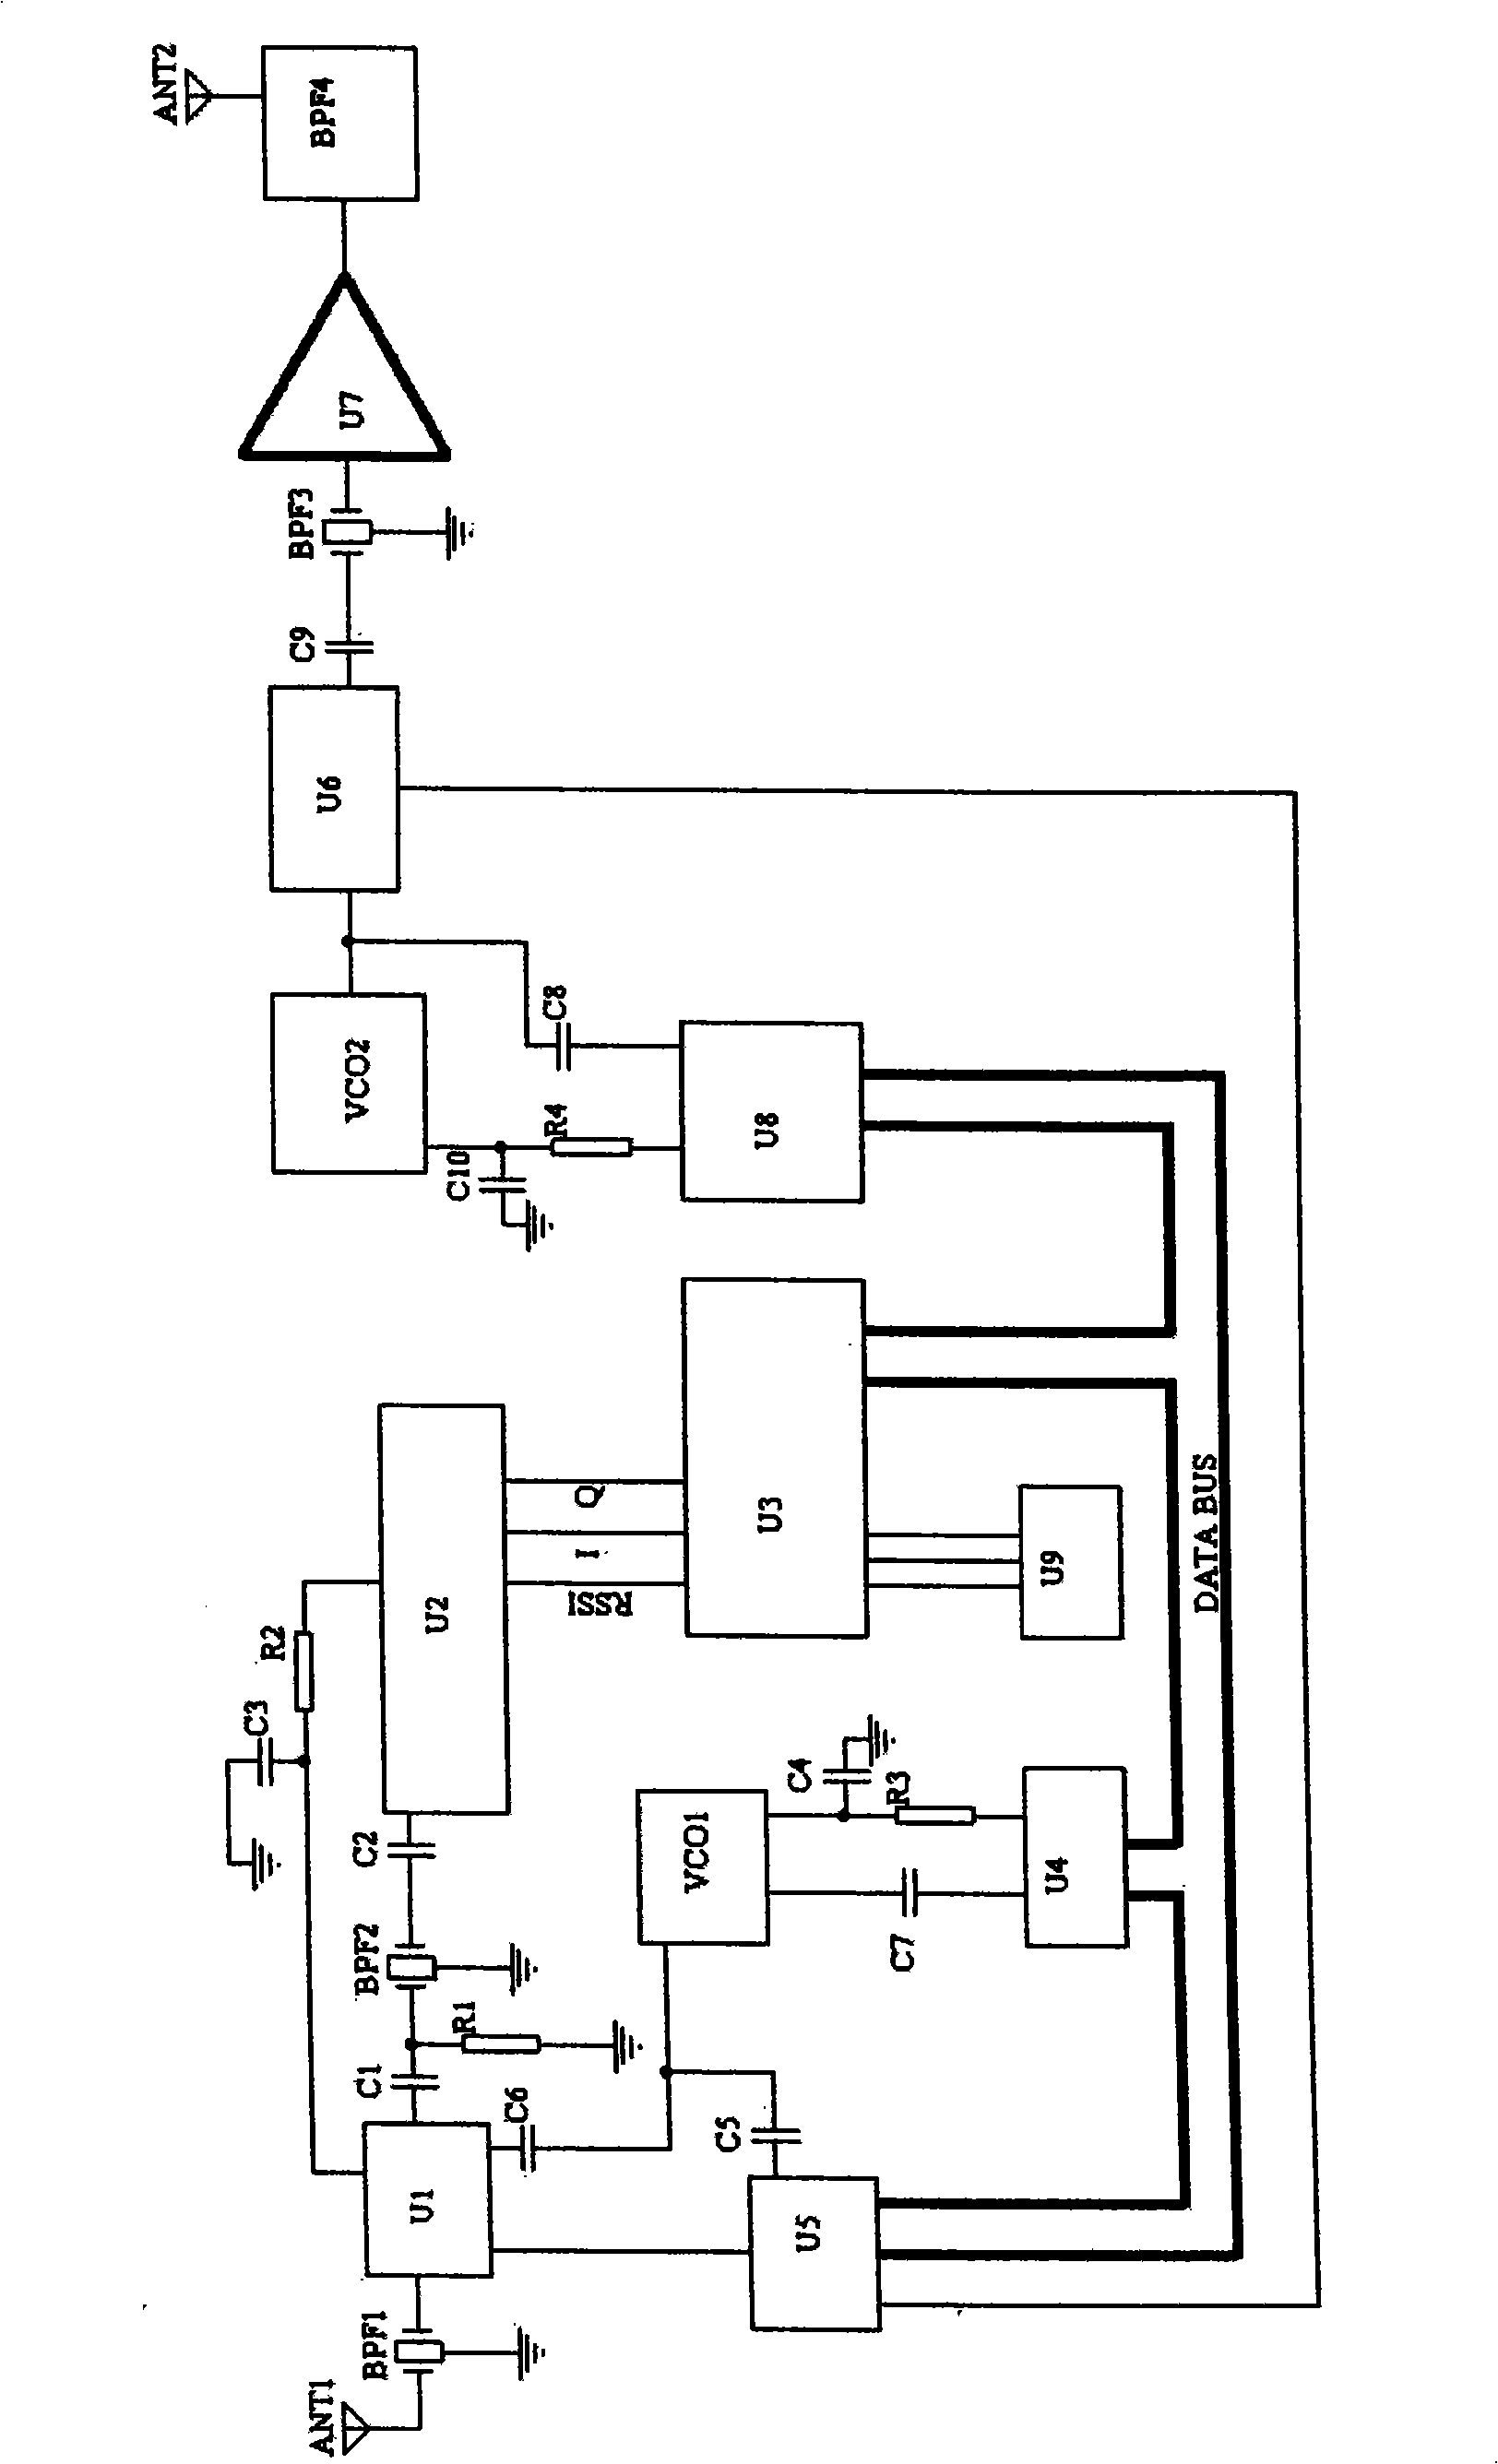 Method for shielding signals of mobile phone and portable wireless instrument for emitting multitone jamming